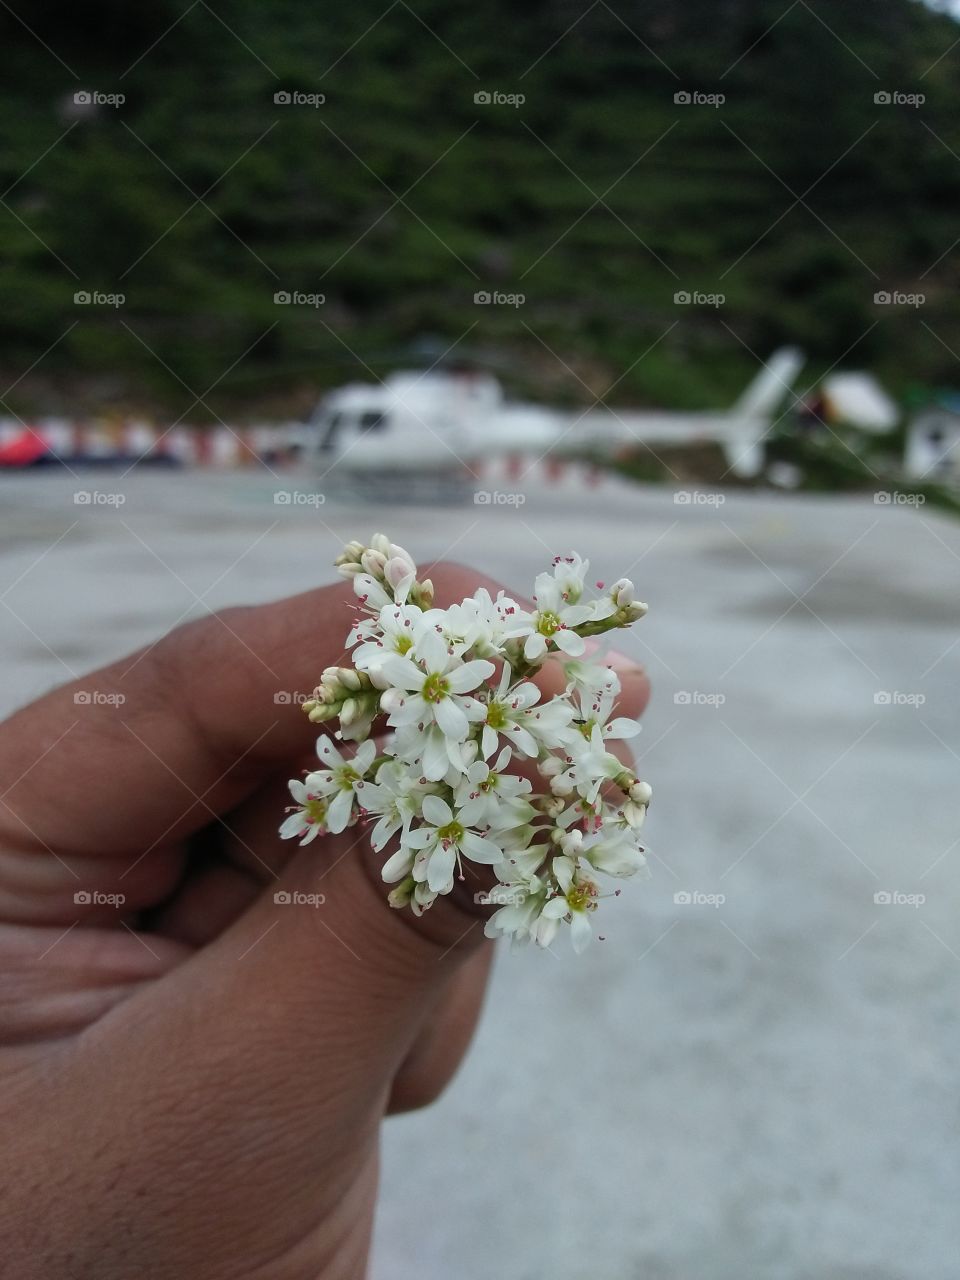 flower and blur helicopter